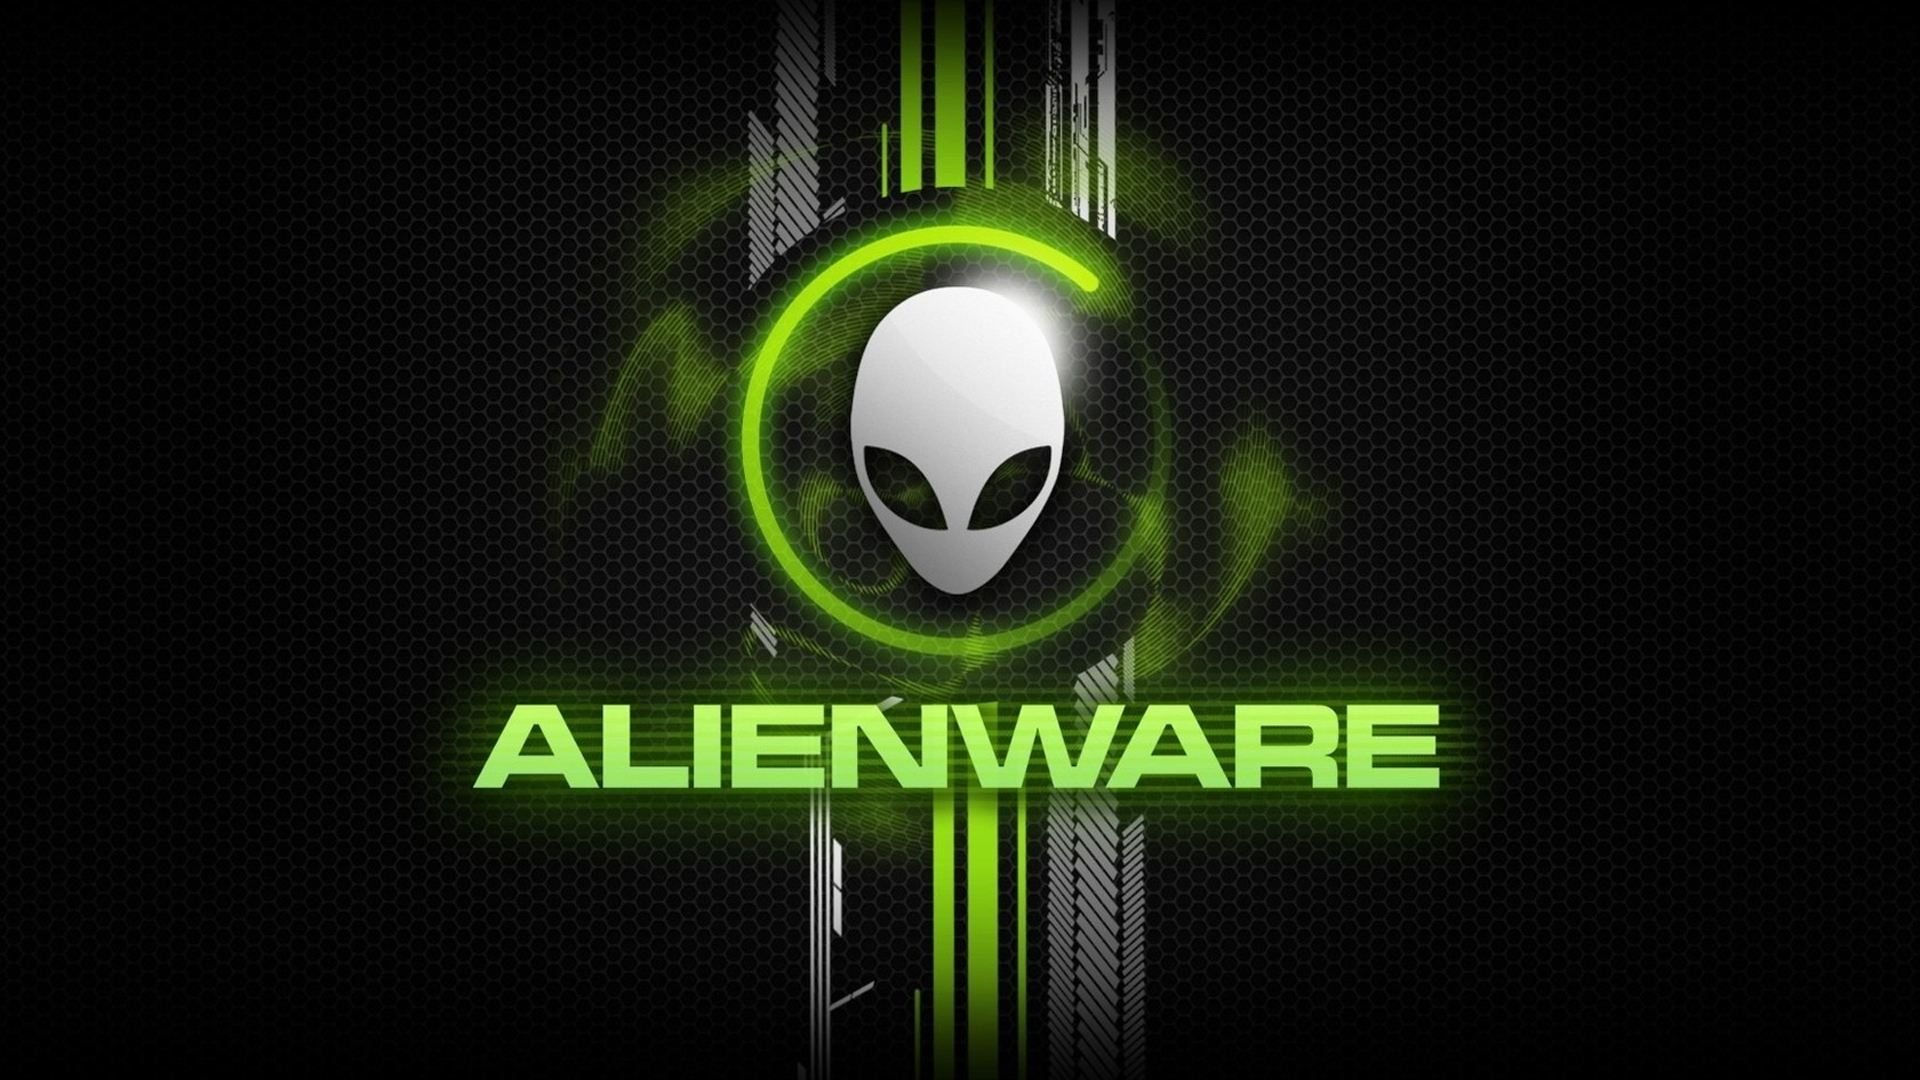 Alienware Logo   High Definition Wallpapers   HD wallpapers